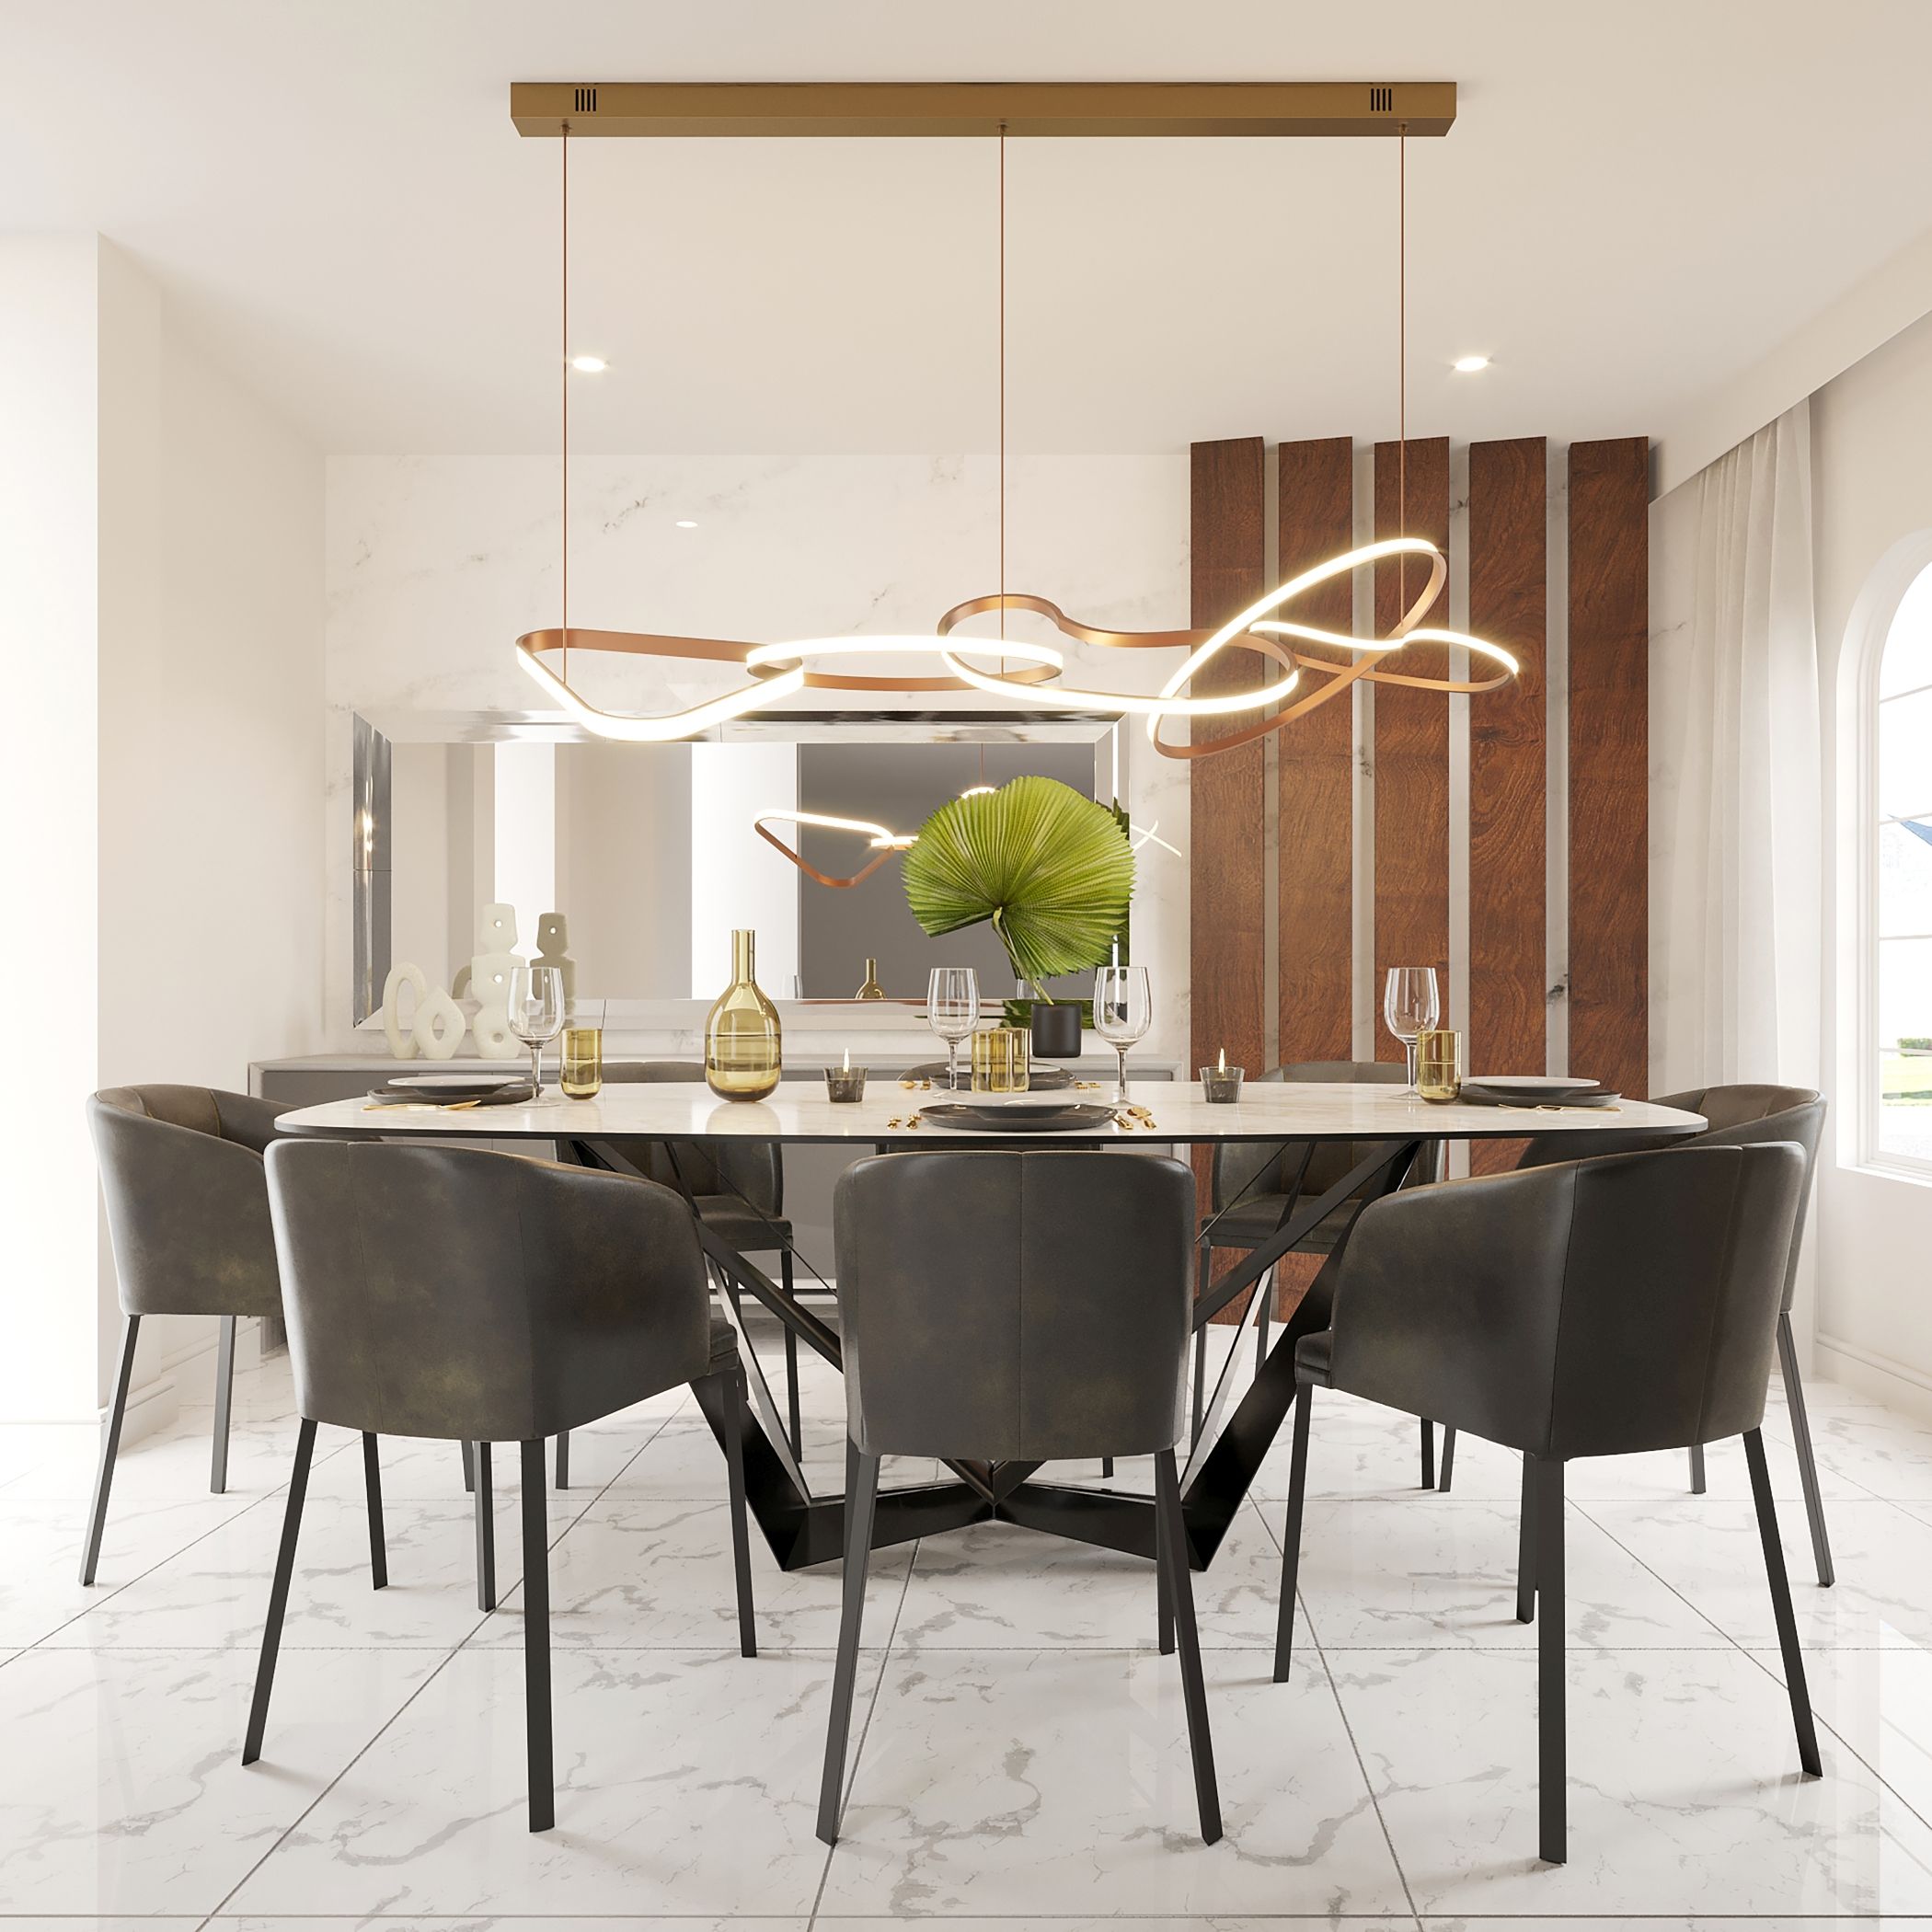 8 Unique Lighting Fixtures For A Dining Room Makeover